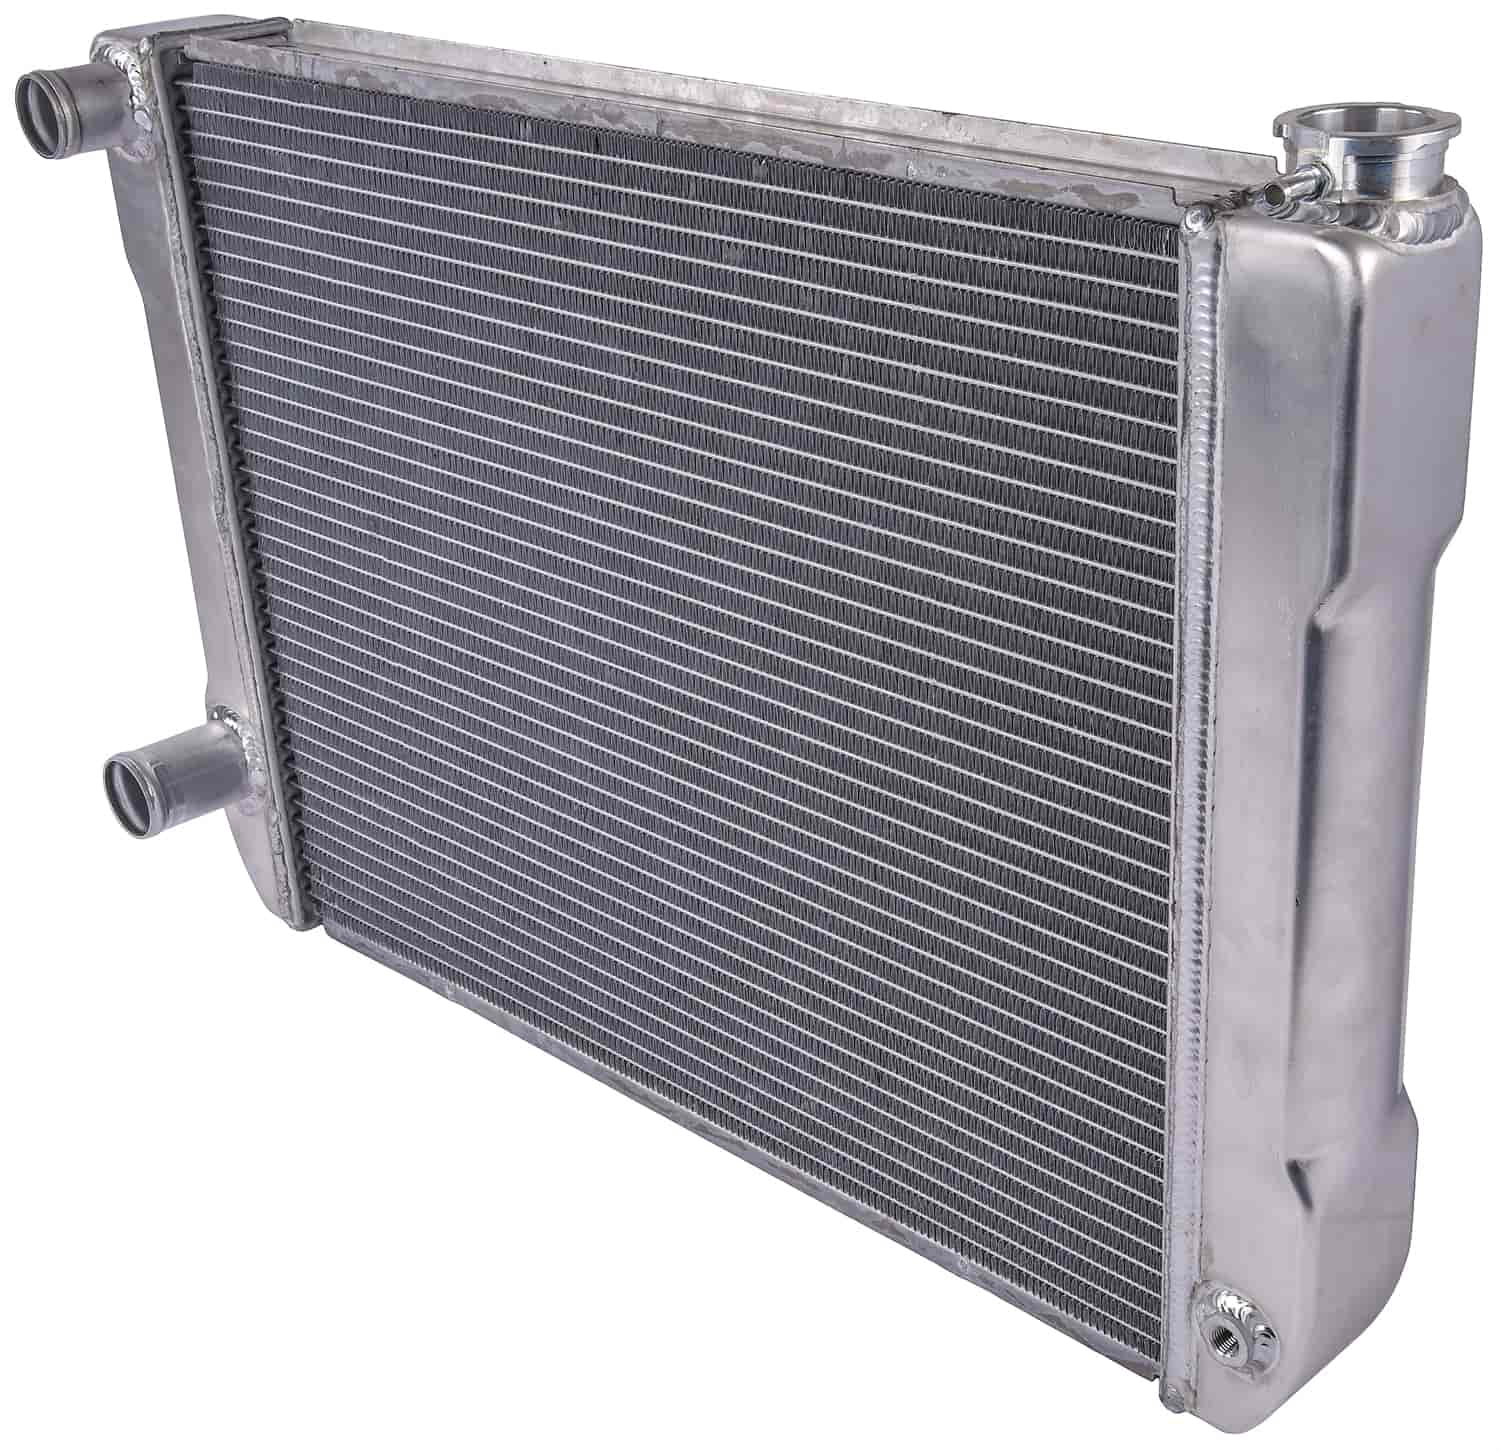 JEGS 52048: Double Pass Racing Radiator 2 Row 1" Core - JEGS